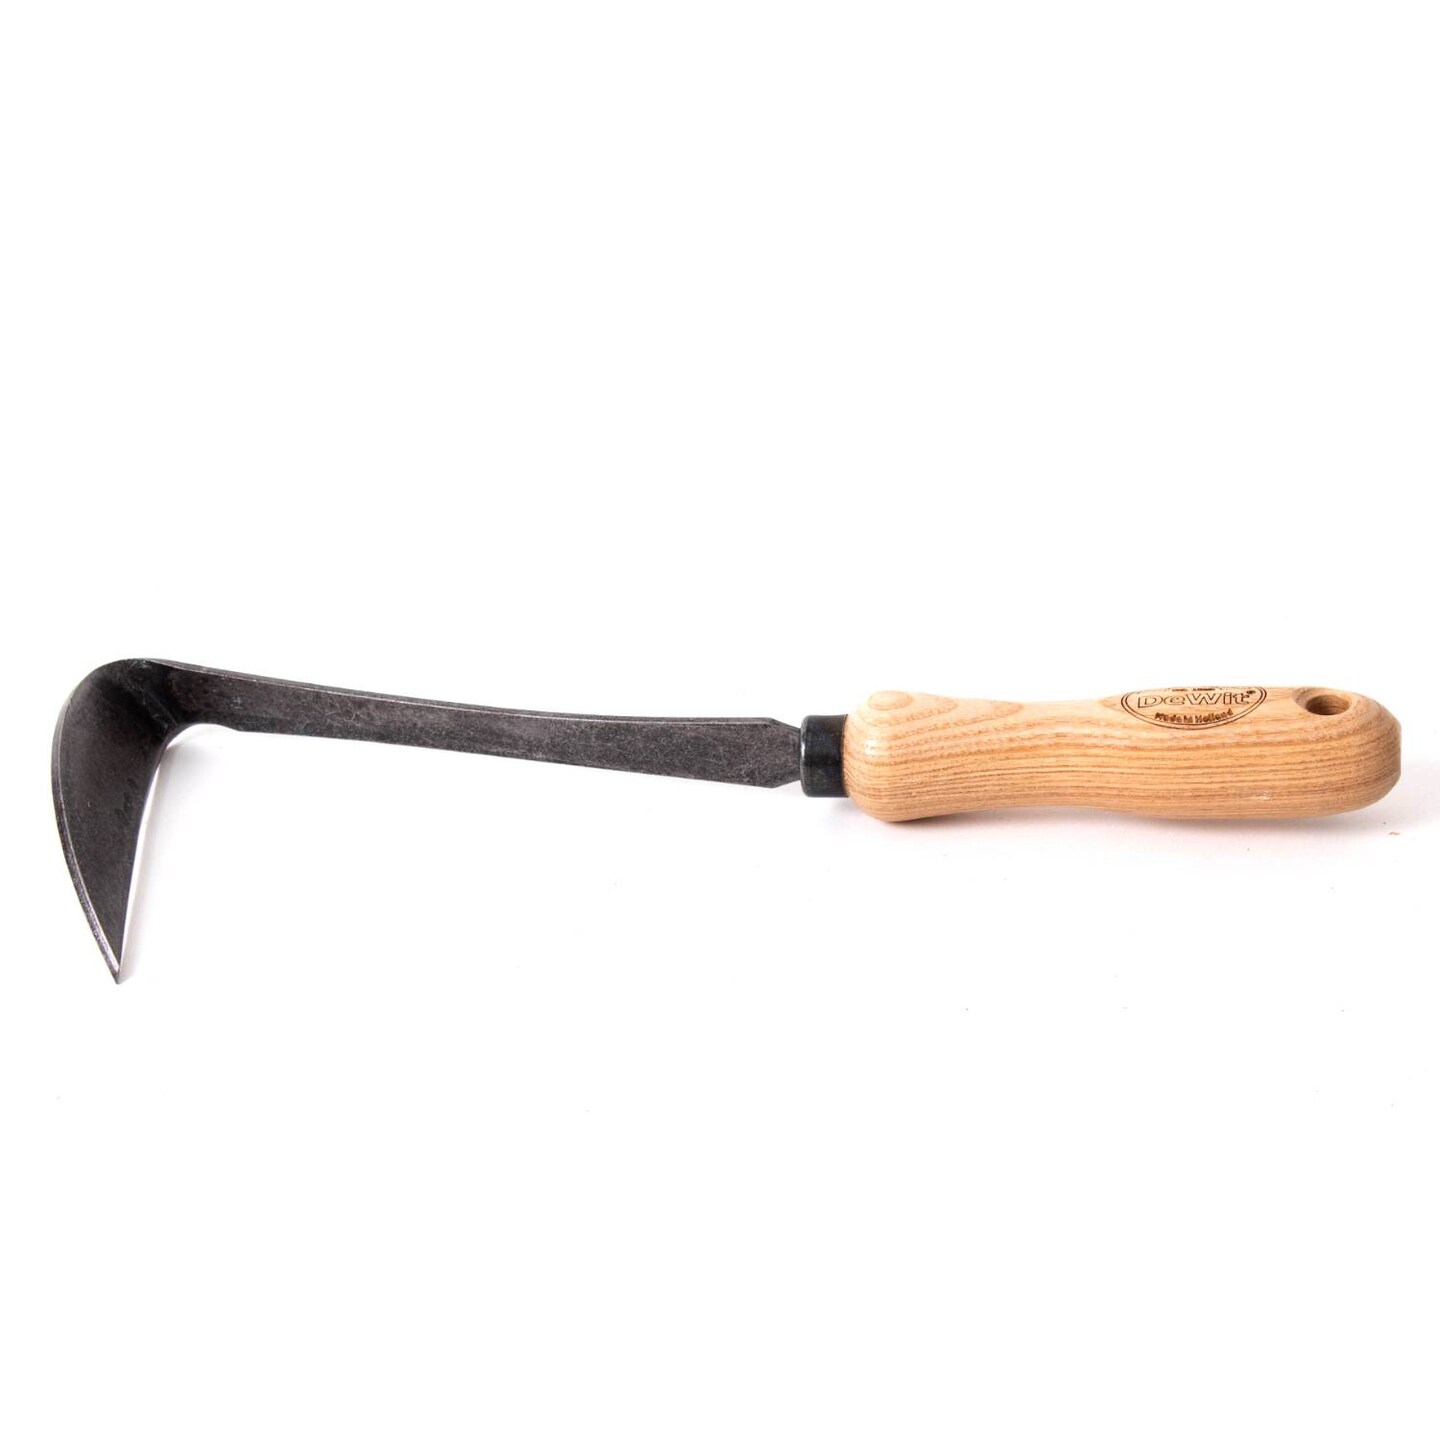 DeWit Right Hand Japanese Hand Hoe - Tempered Boron Steel with Ash Wood Handle, 12 inches long